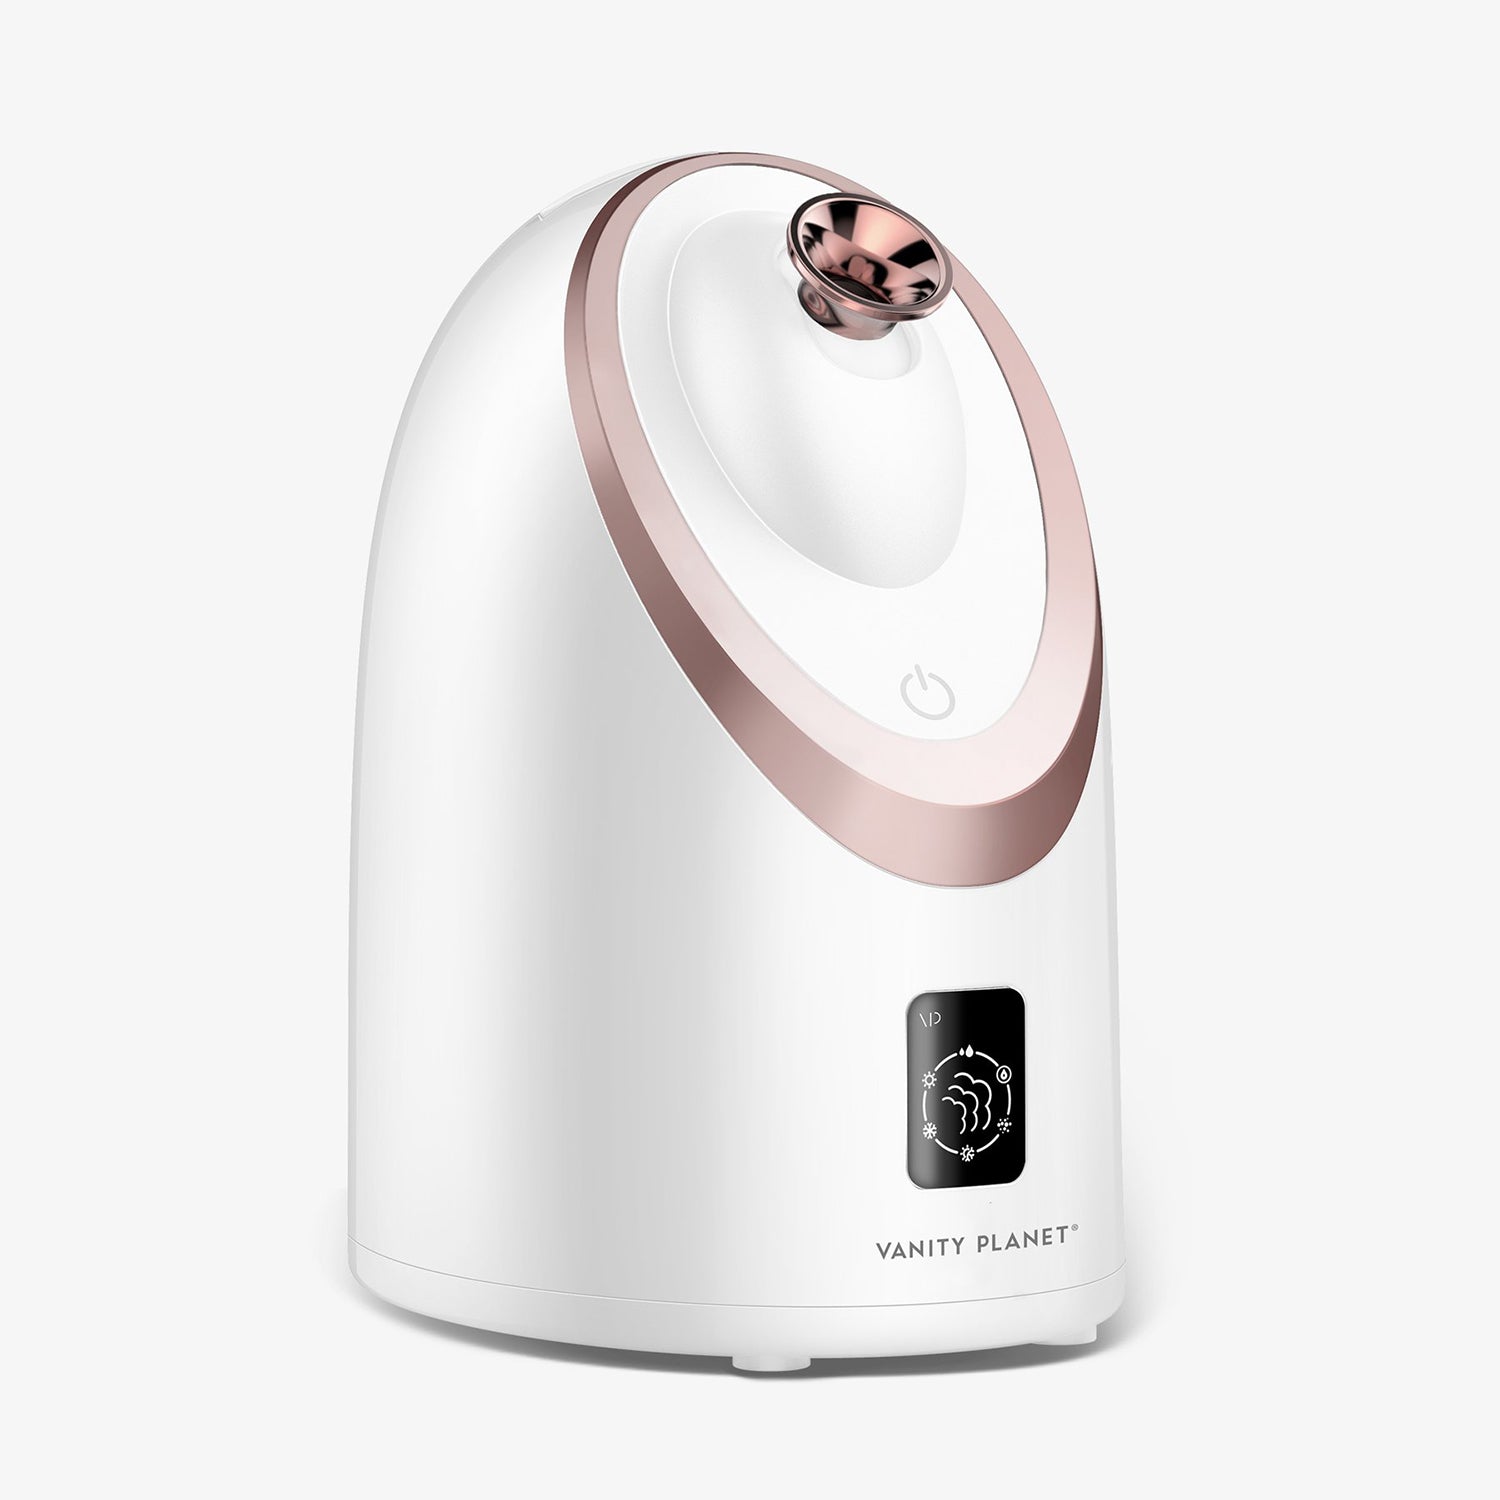 Vanity Planet Senia Hot and Cold Smart Facial Steamer / WHITE